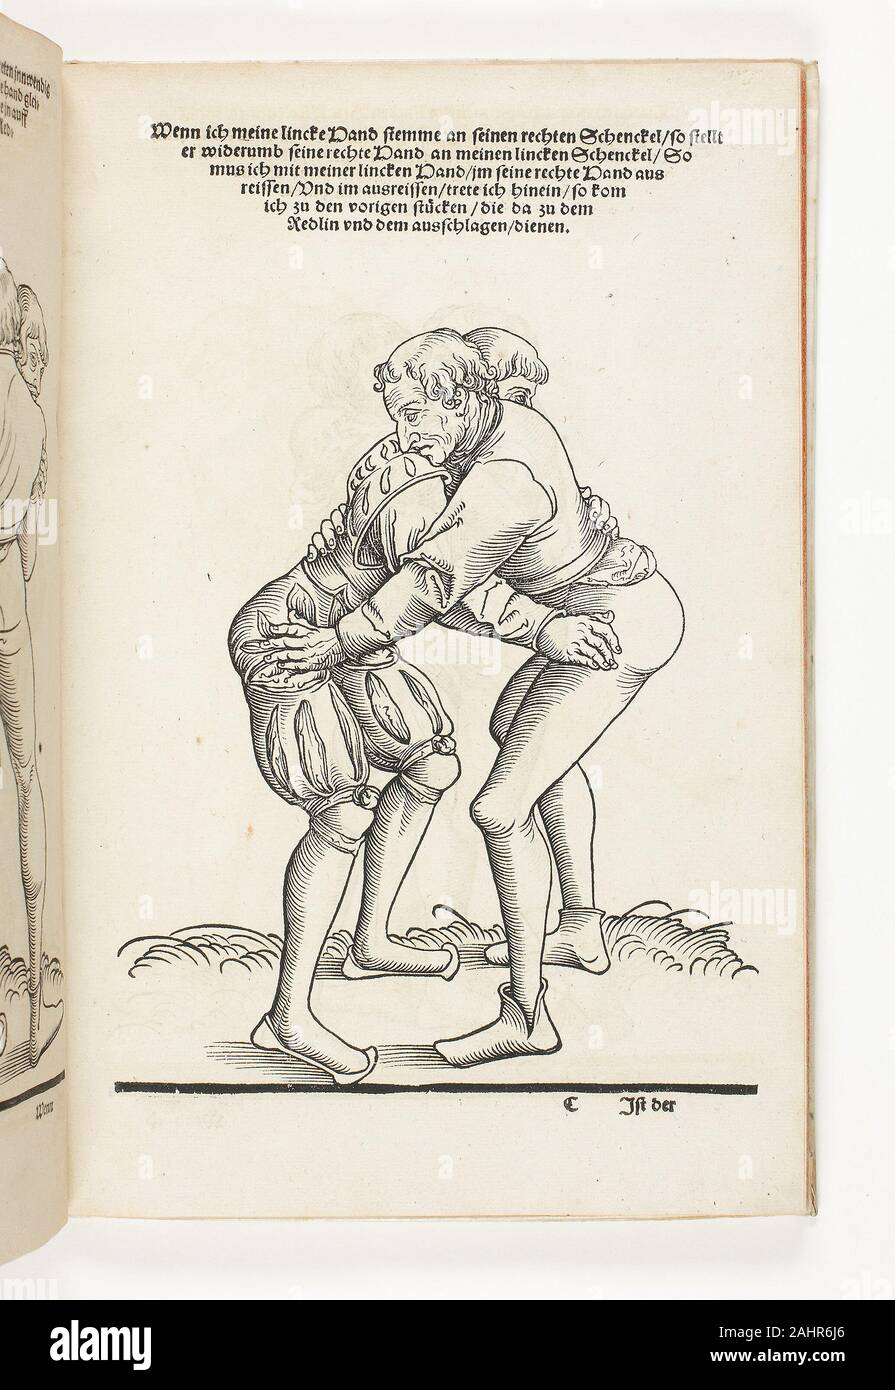 Lucas Cranach, II. The Art of Wrestling Eighty-Five Pieces (Ringer Kunst Fünff und Achtzig Stücke). 1539. Germany. Book with woodcuts and letterpress in black on cream laid paper Stock Photo